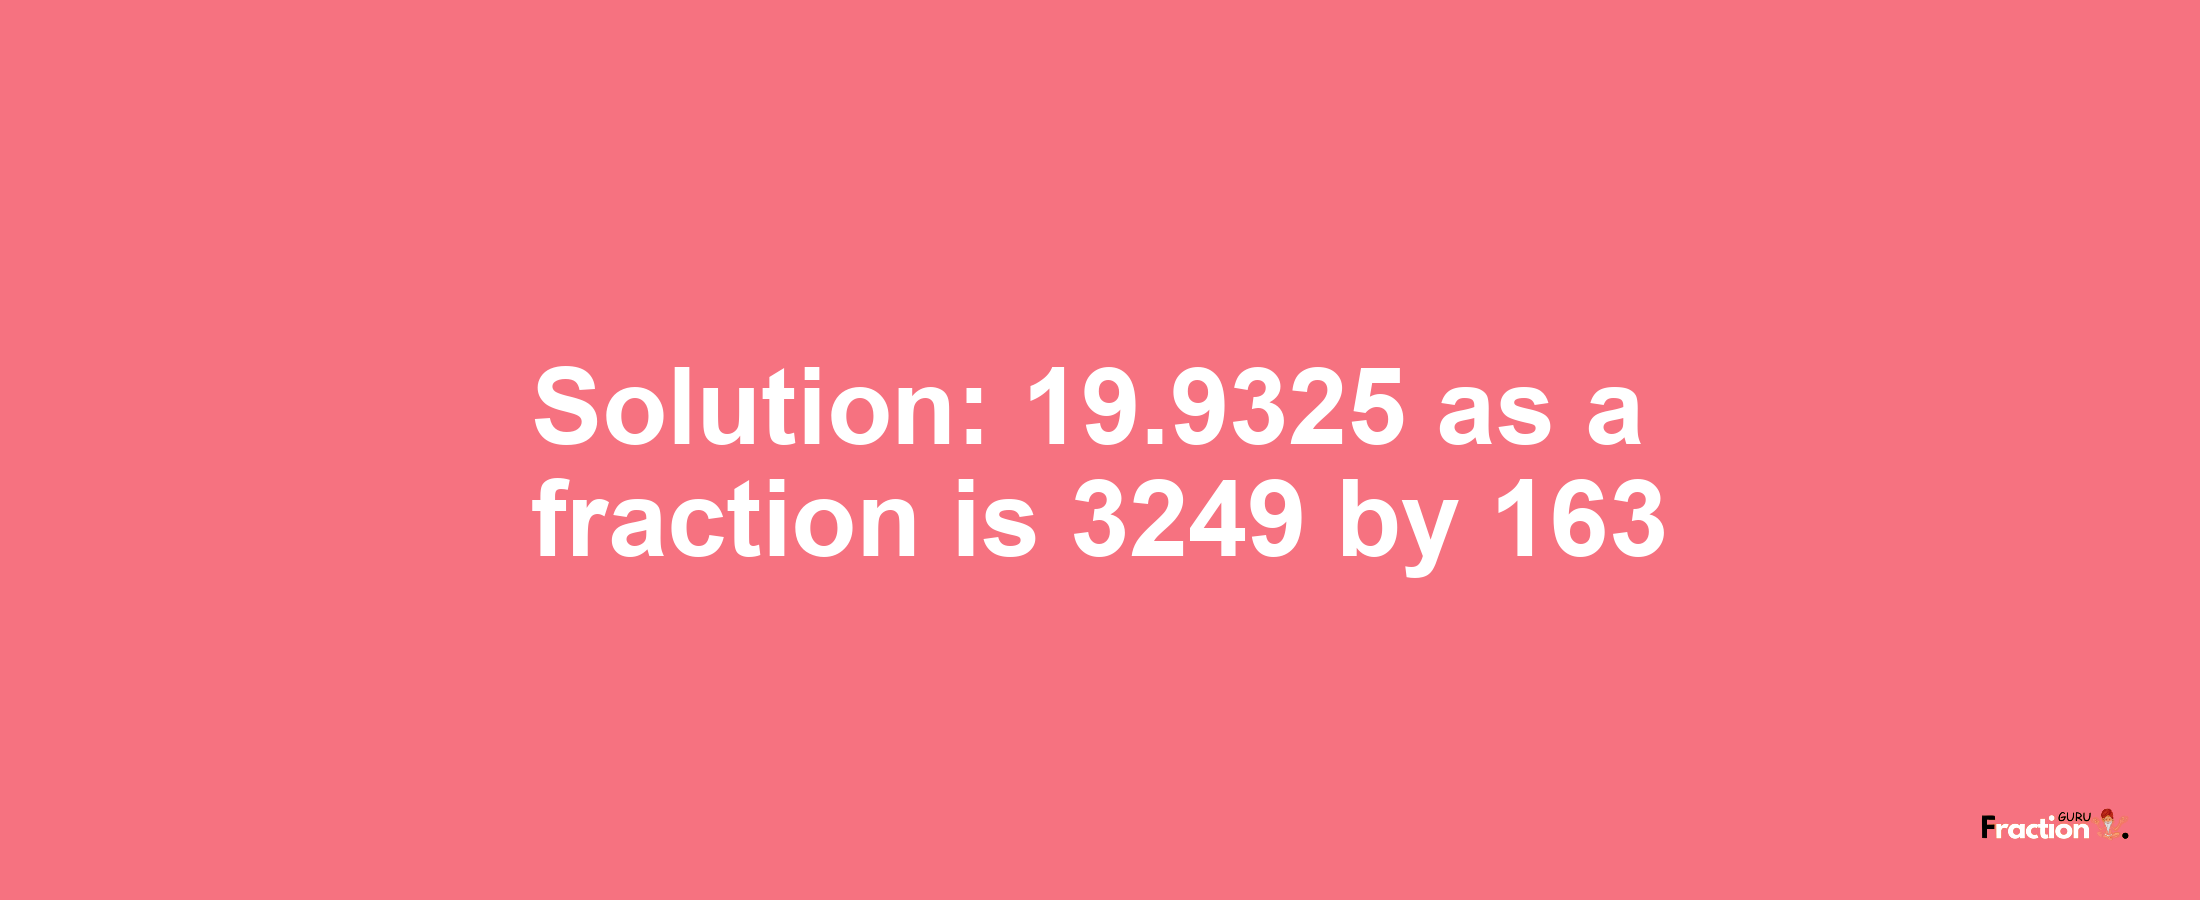 Solution:19.9325 as a fraction is 3249/163